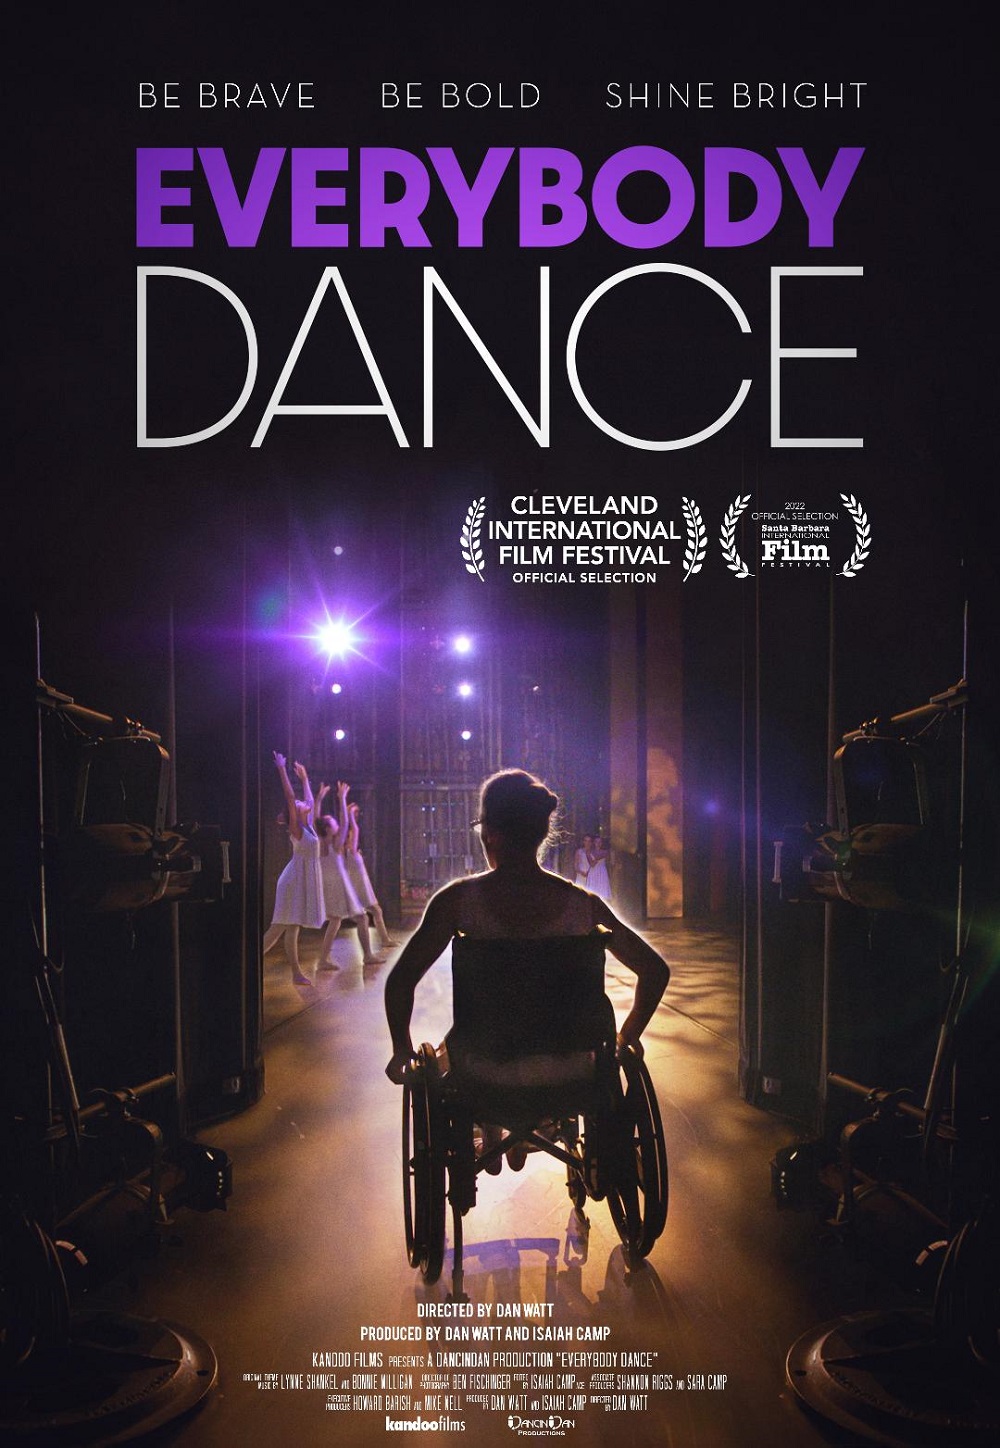 EVERYBODY DANCE documentary celebrates dance for kids with all abilities